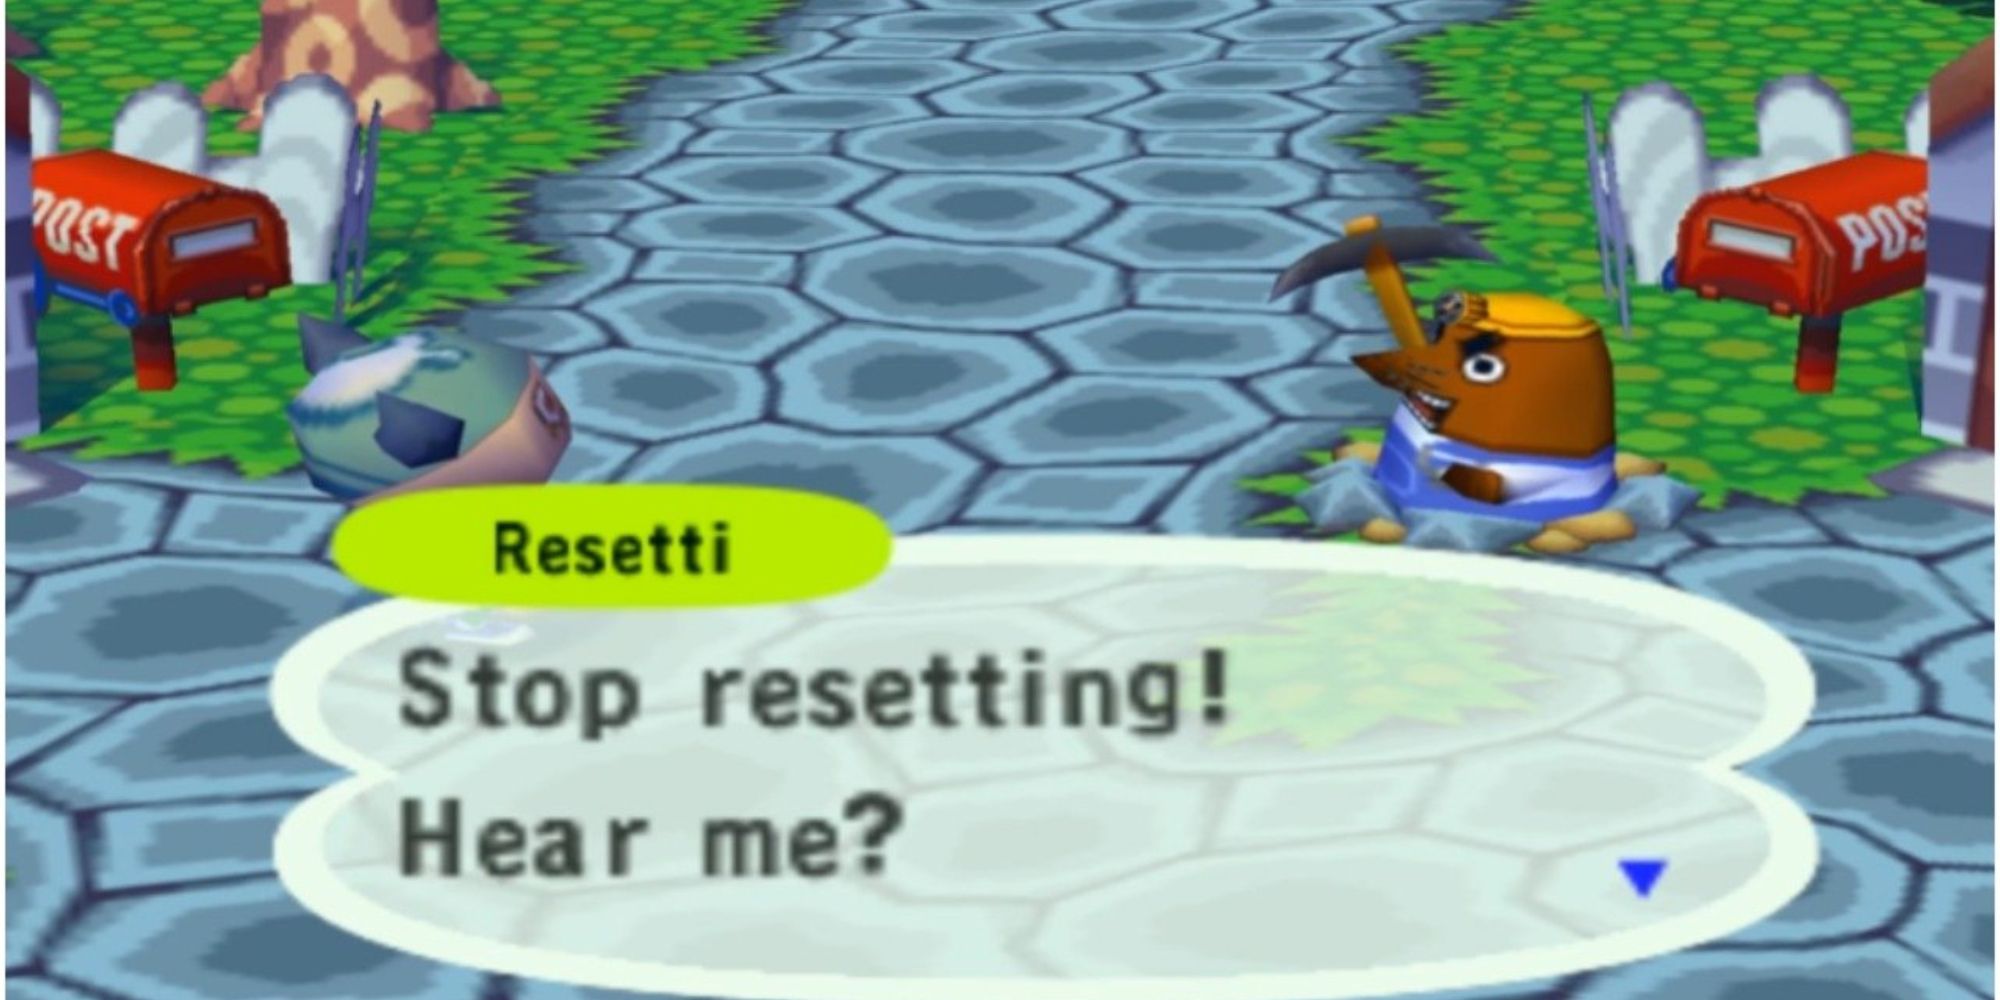 Animal Crossing Resetti would waste players' time as punishment for cutting corners